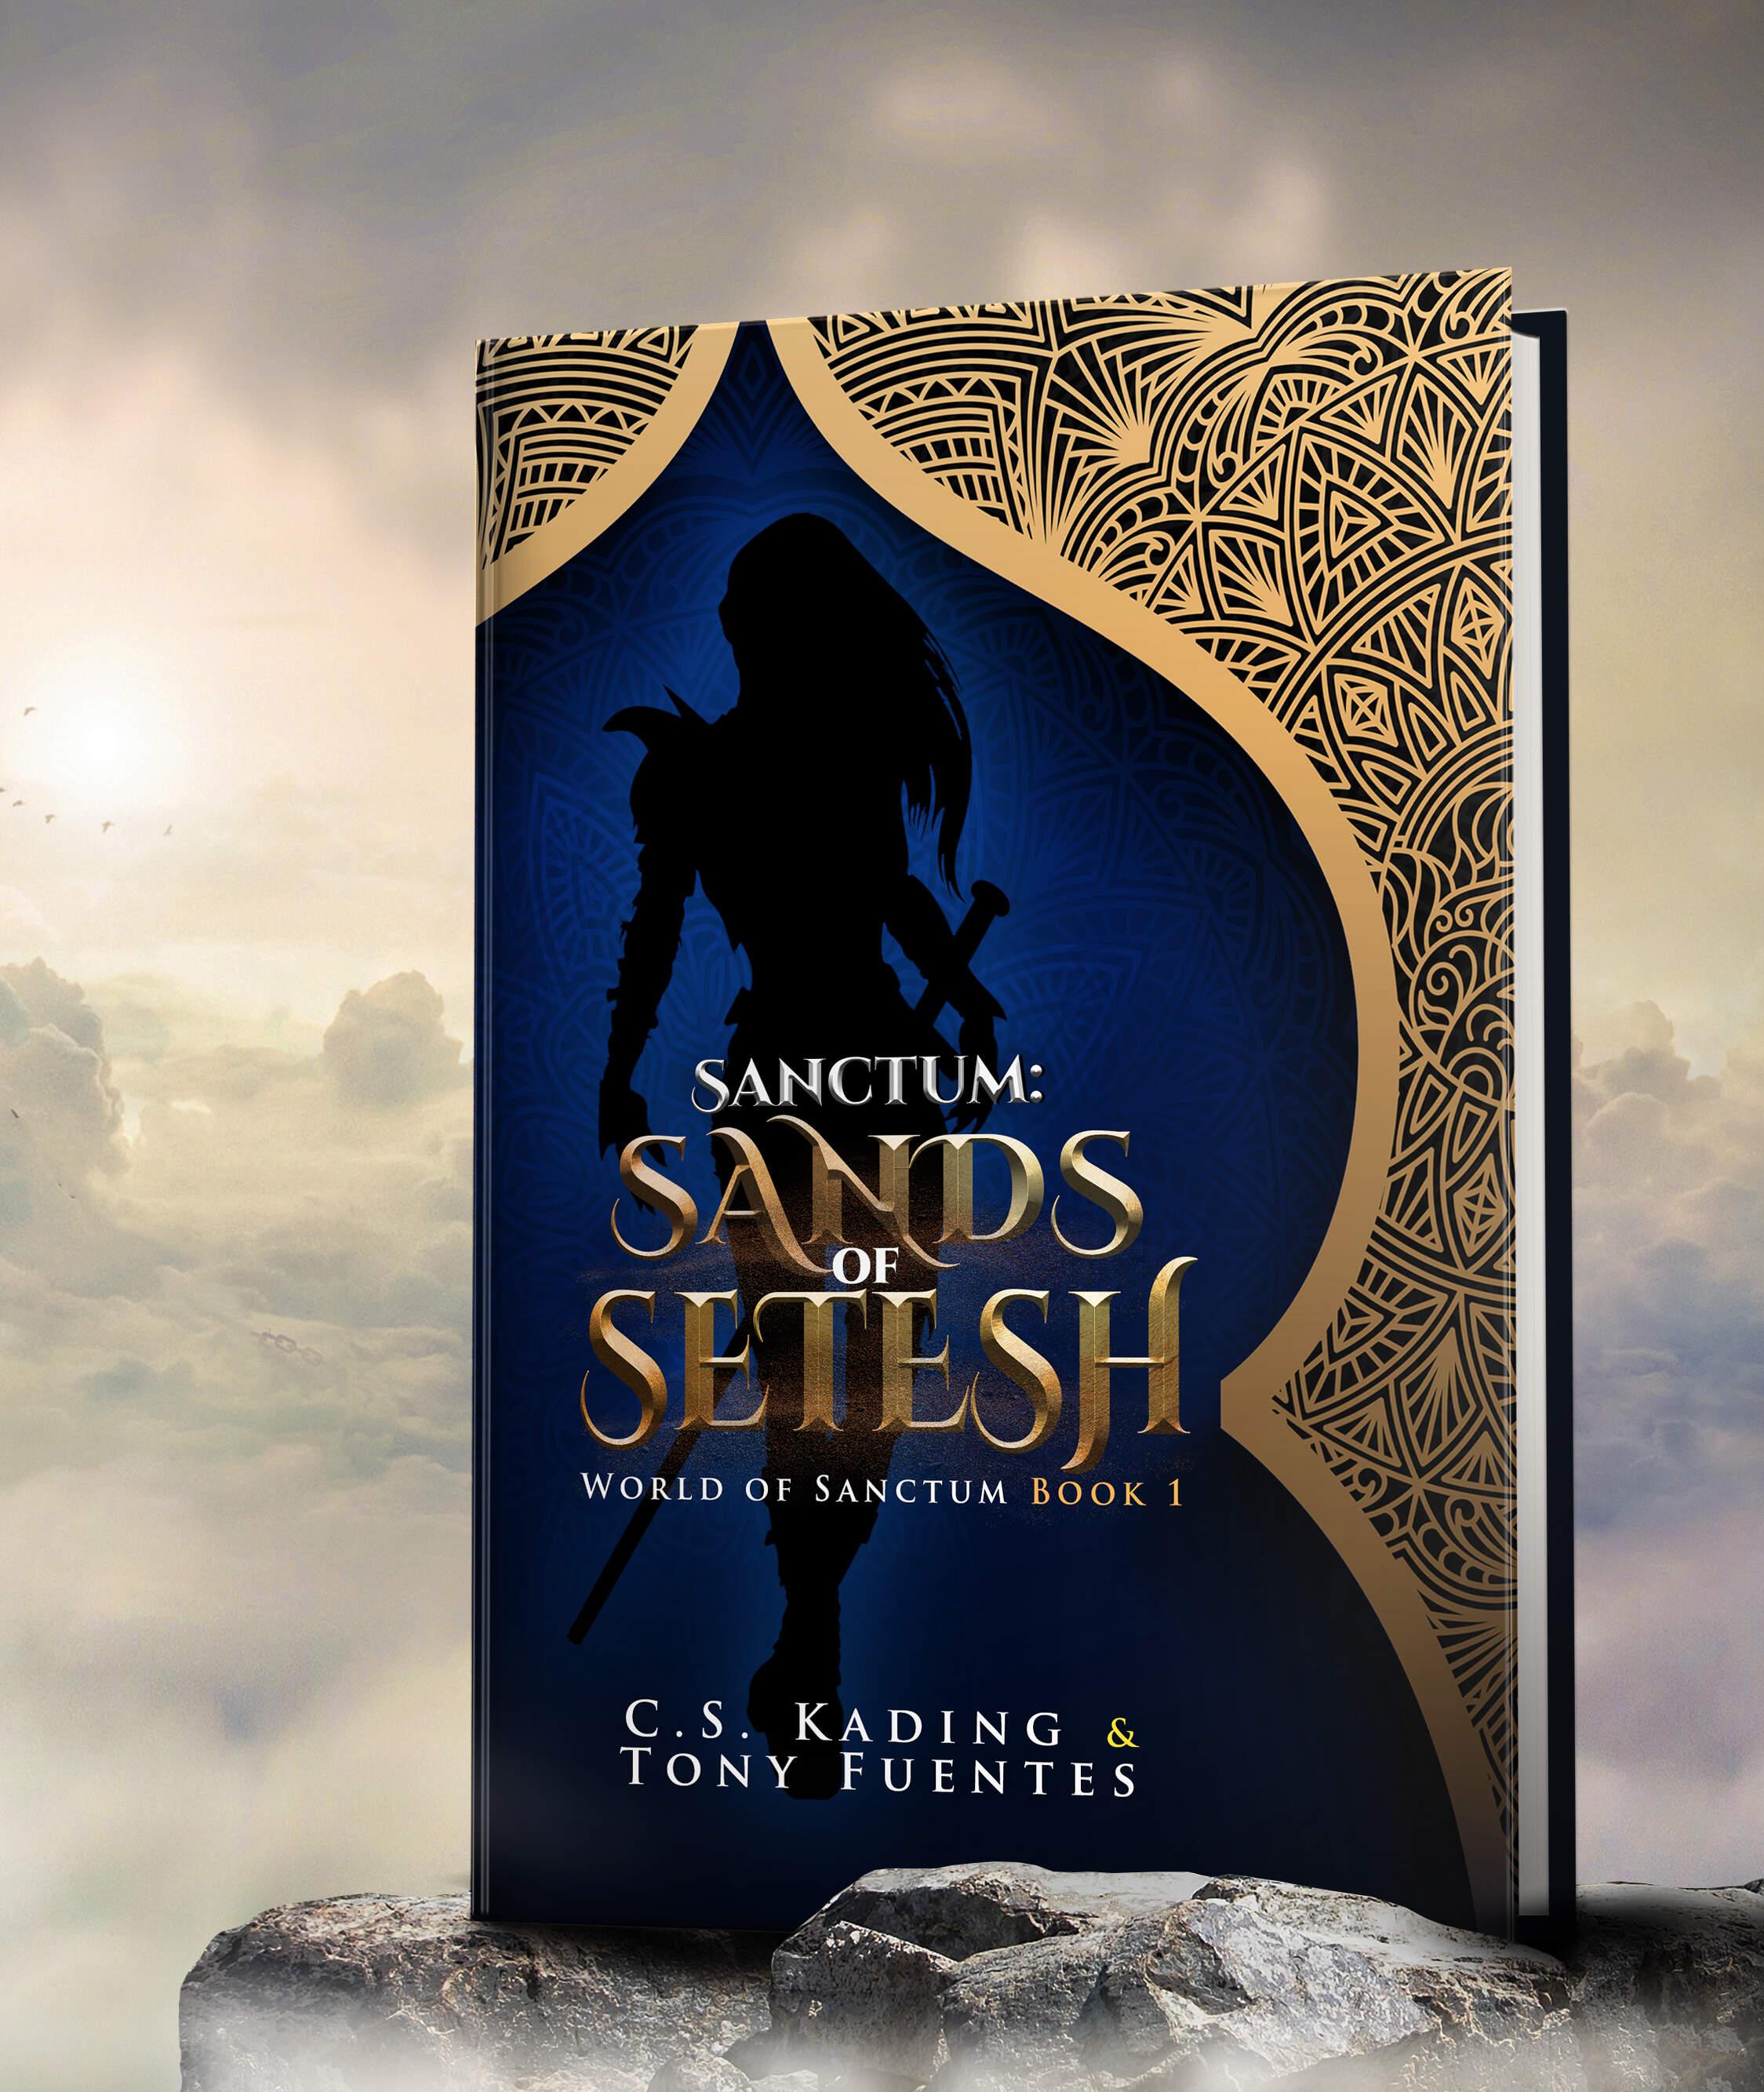 3D image of Sands of Setesh cover